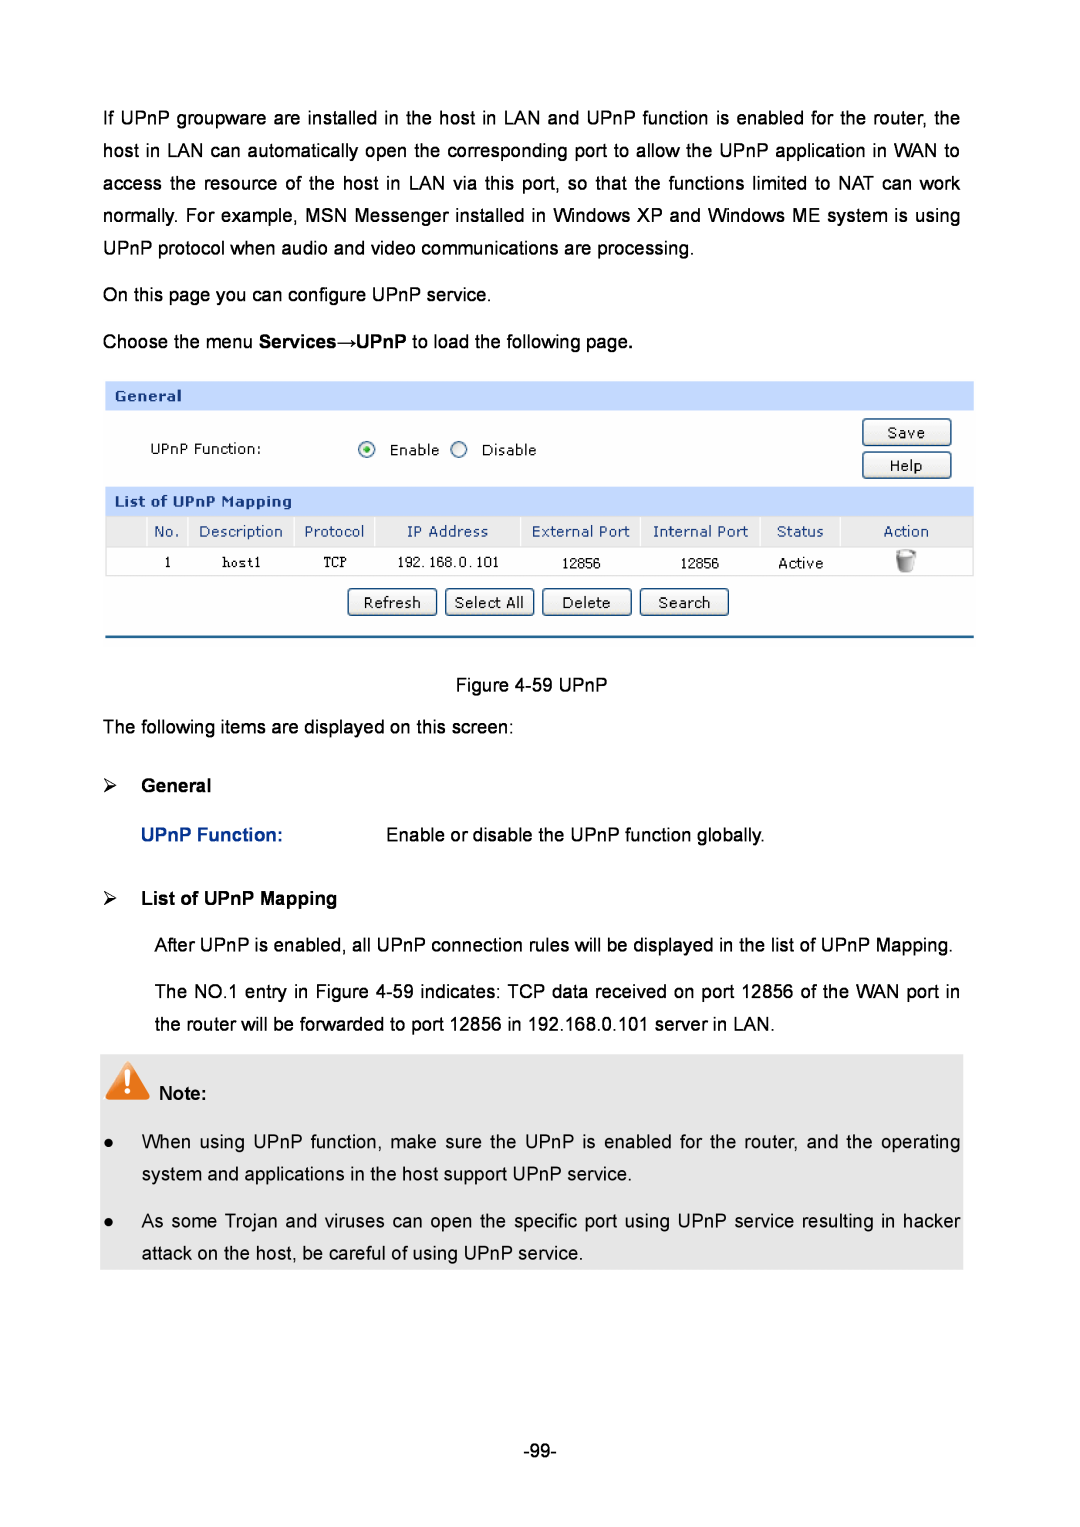 TP-Link 1910010933 manual ¾ List of UPnP Mapping, On this page you can configure UPnP service, ¾ General 